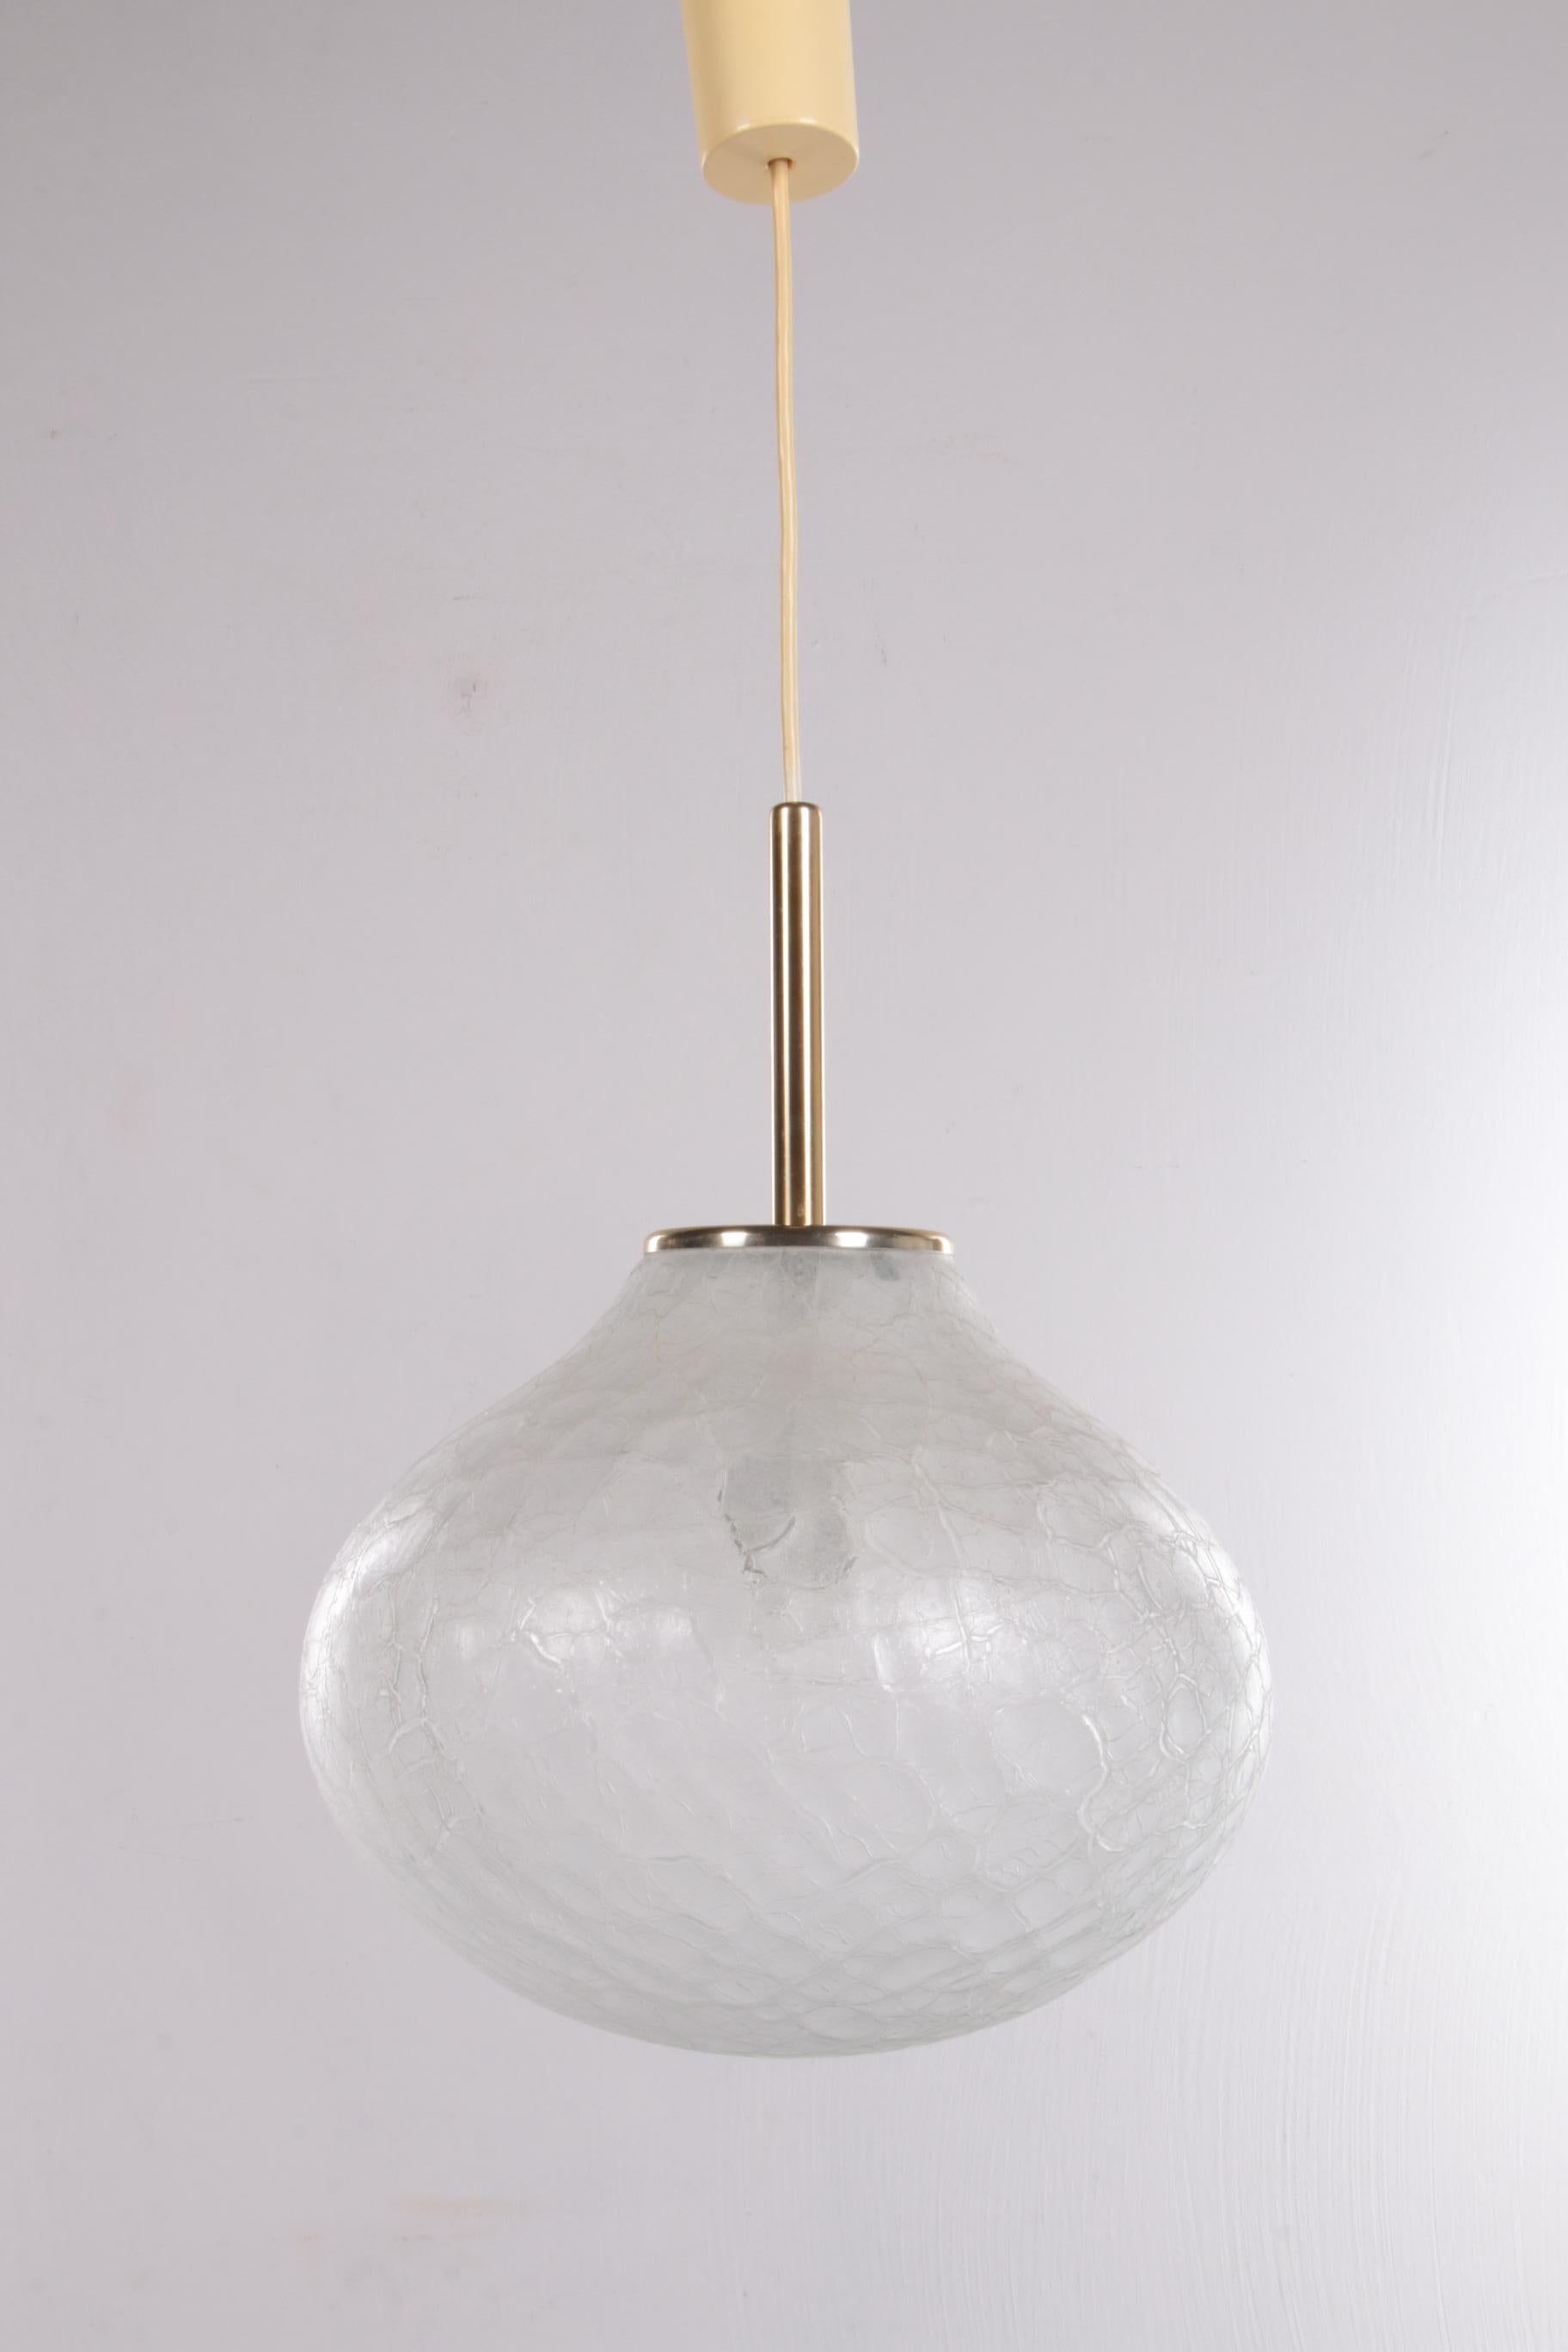 Very rare glass hanging lamp by Doria Leuchten, 1960, Germany


This is a beautiful rare pendant lamp by Doria Leuchten. This lamp comes from Germany and was made in the 1960s. The lamp is made of glass, which is also called 